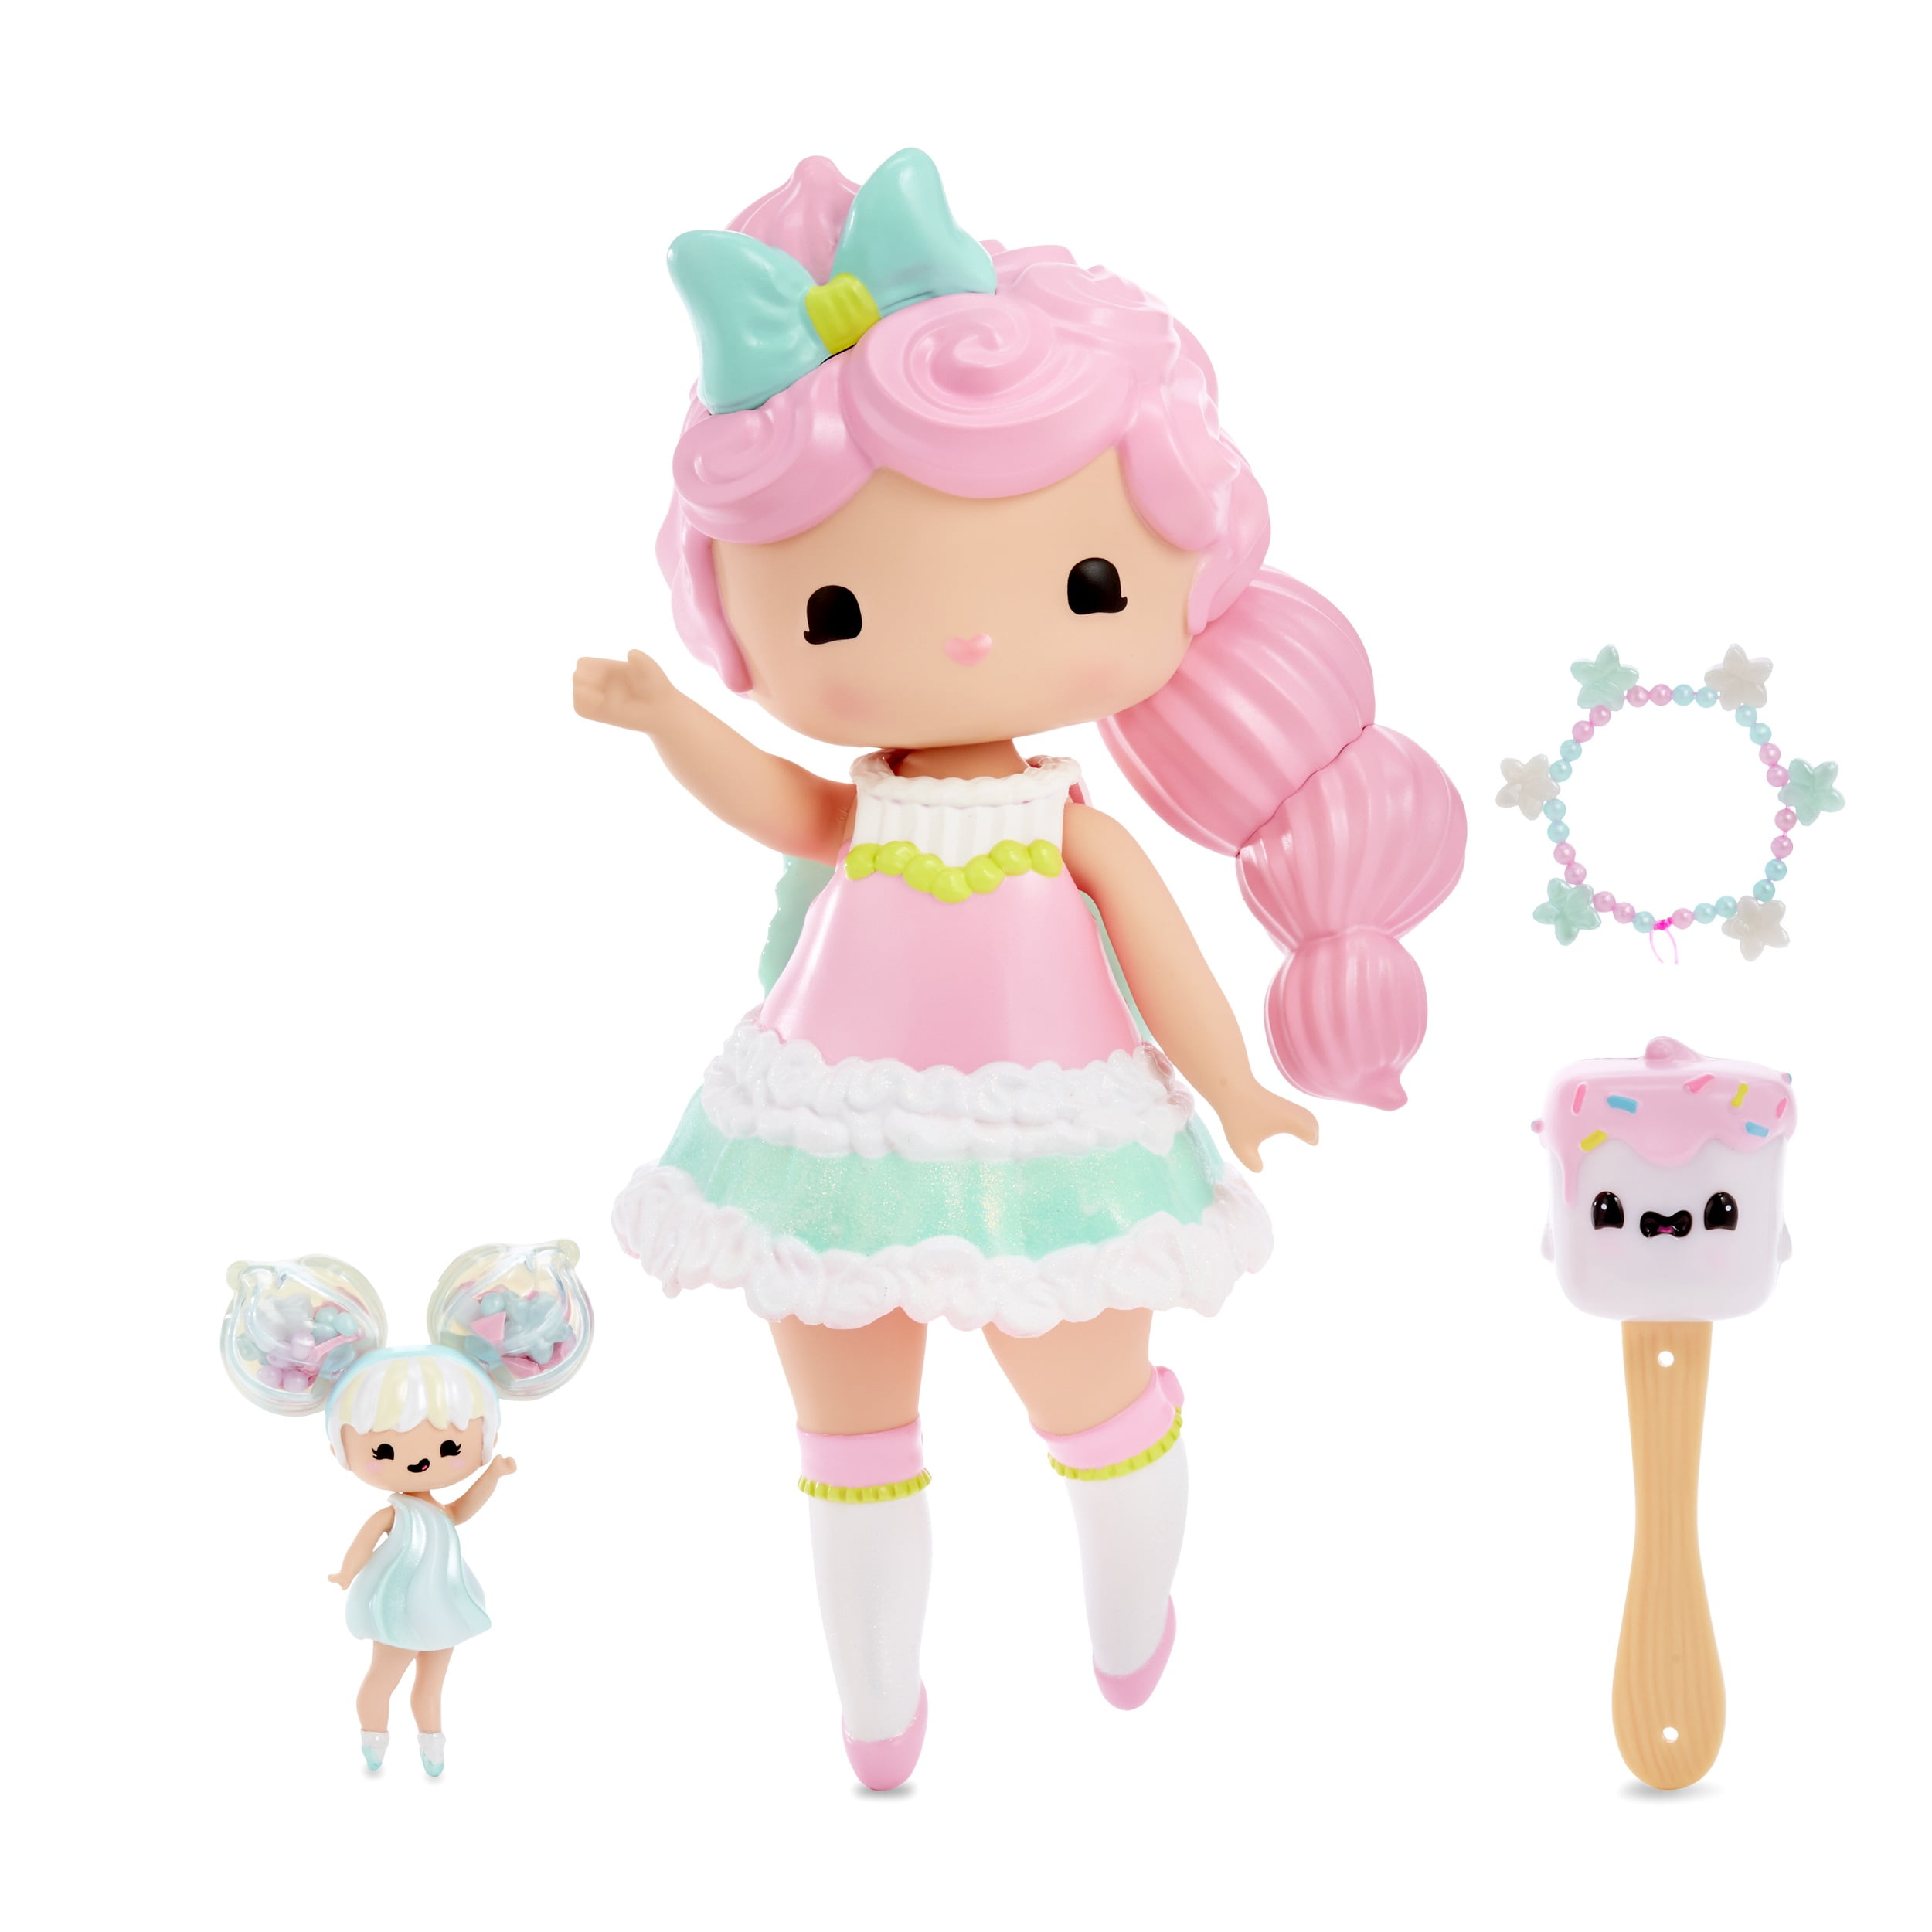 SECRET CRUSH Minis Crush to Find Unwrap & Build & Customize Doll 10 to Collect 